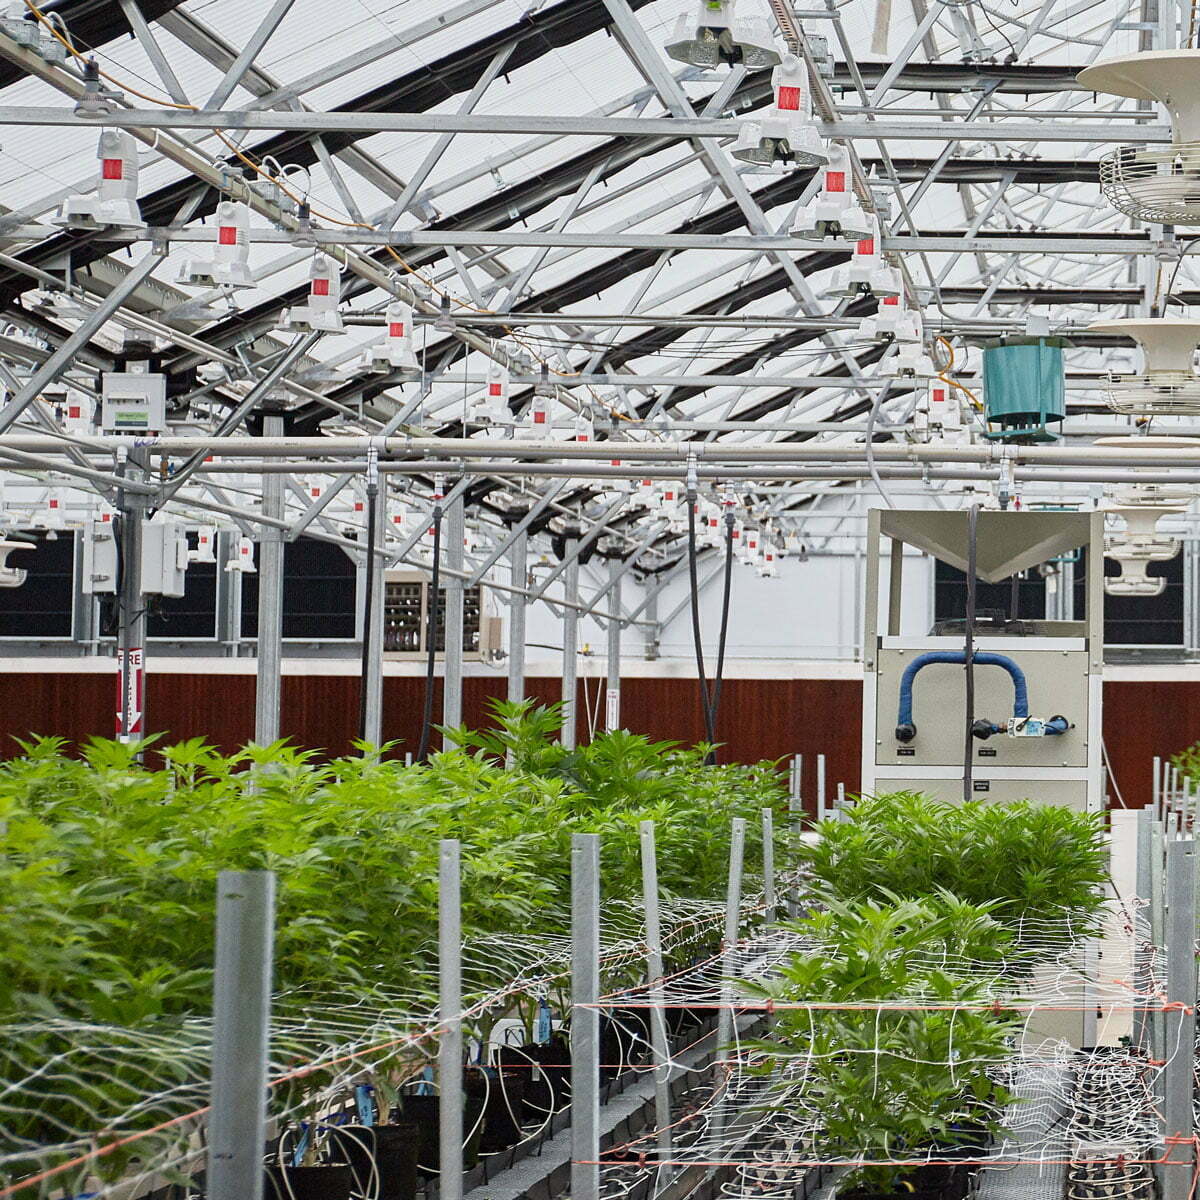 dehumidification system in cannabis greenhouse